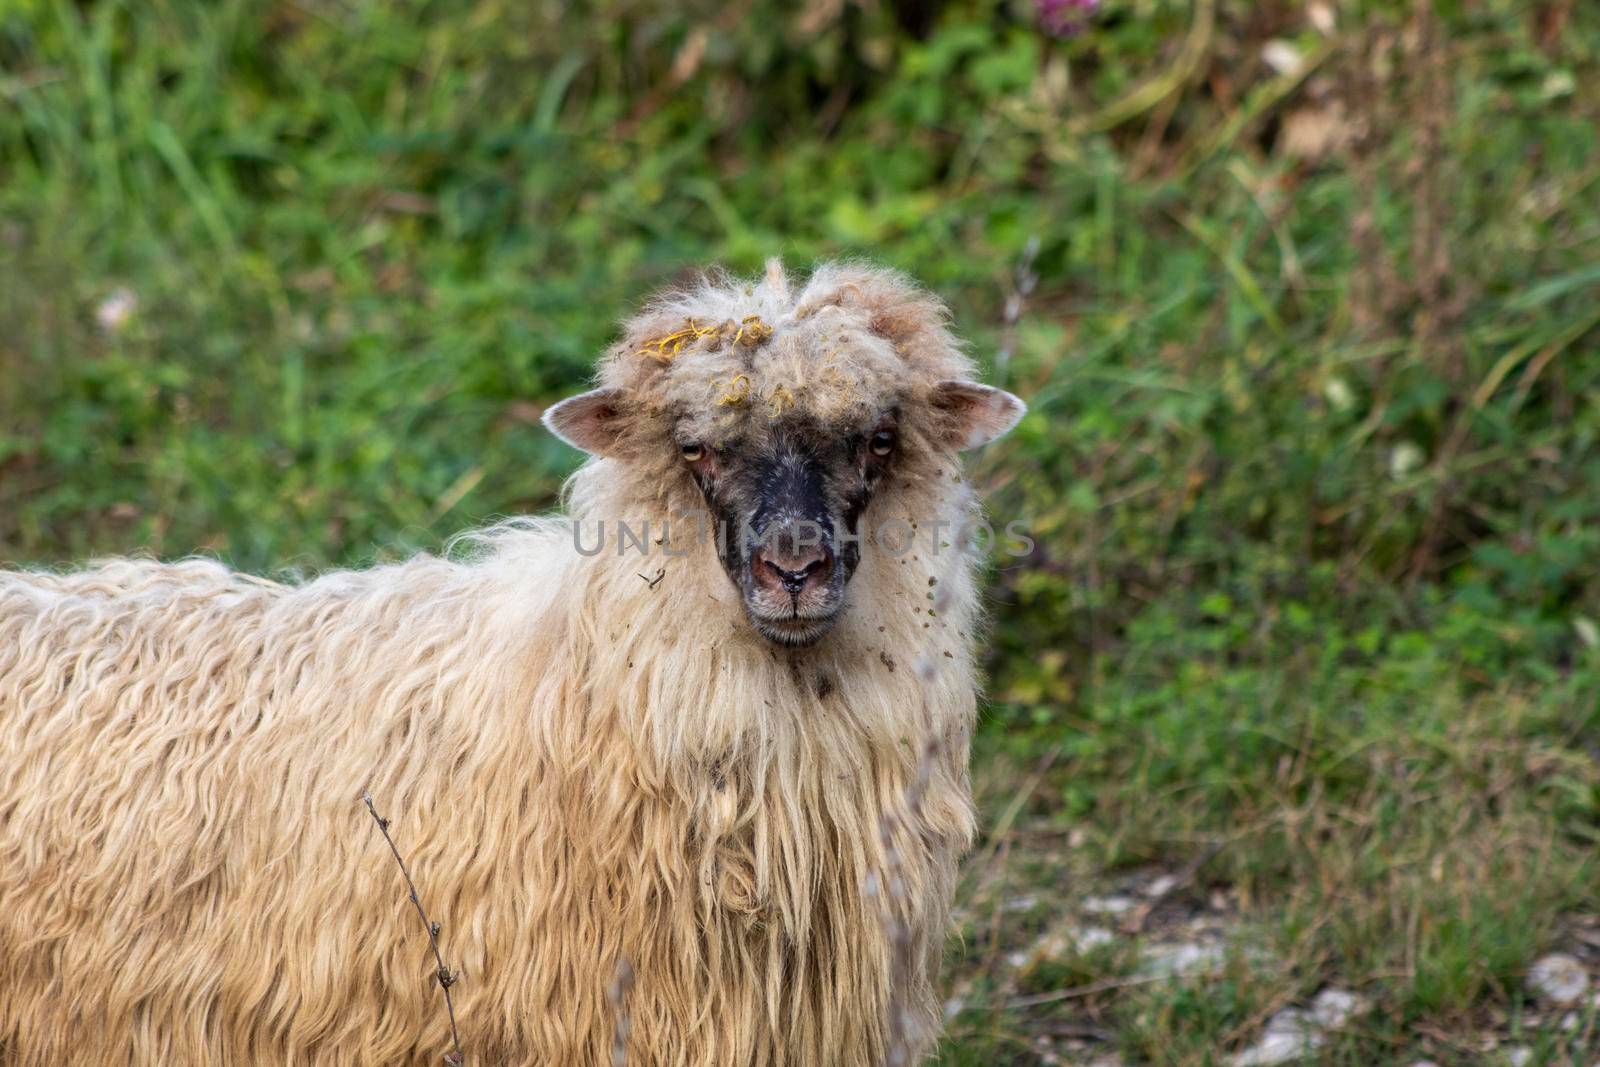 A country sheep with a black face